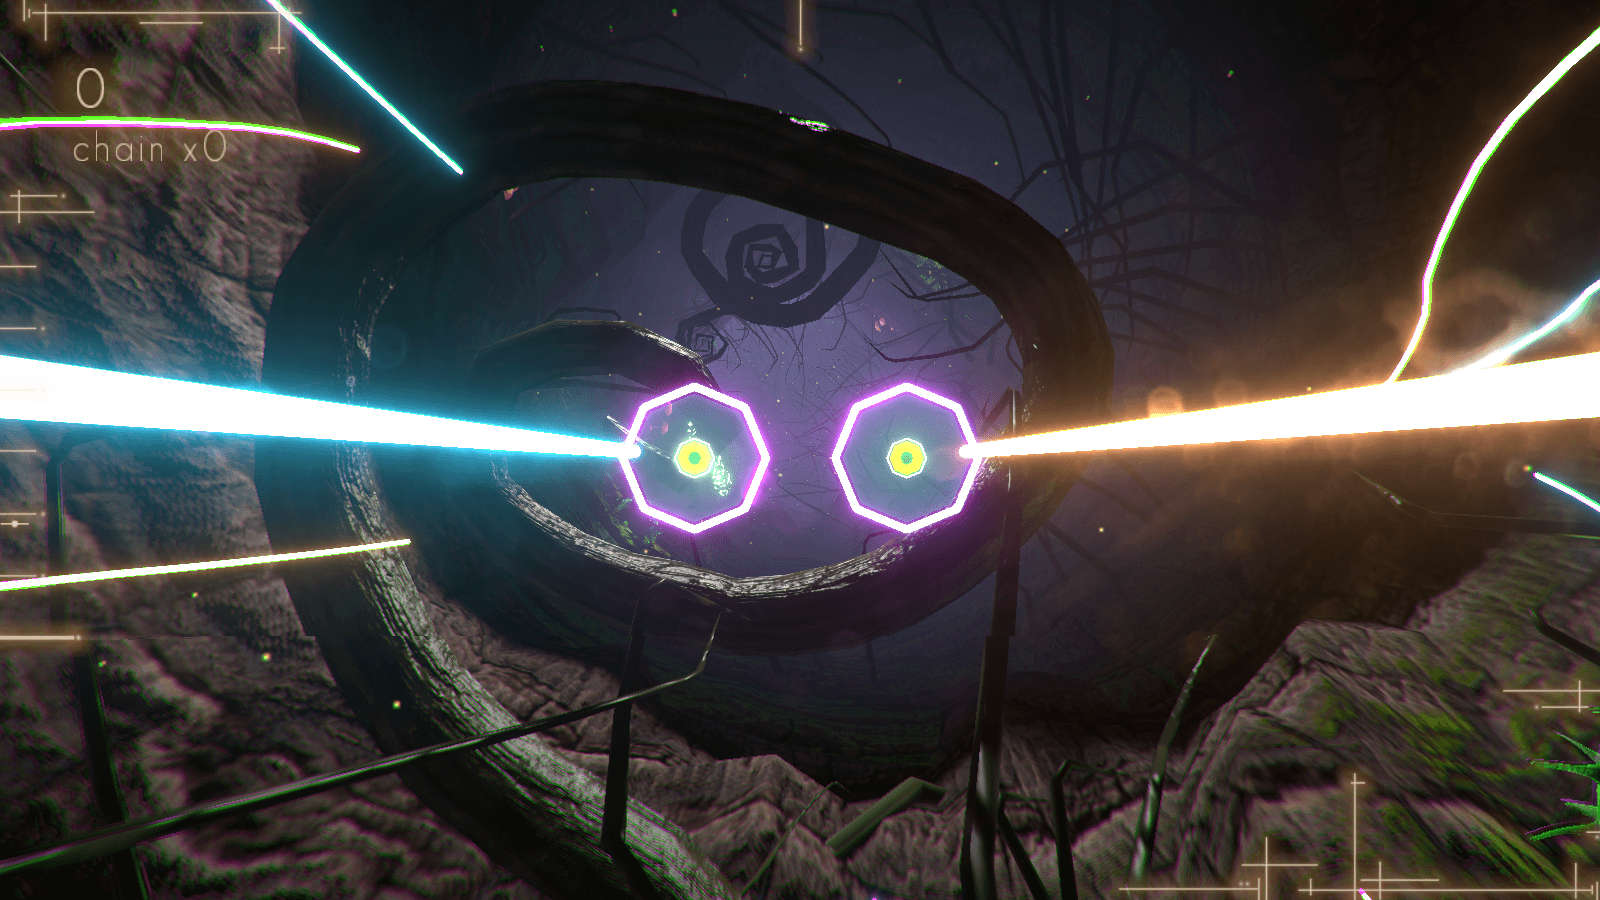 LaserLife is a short but engaging journey of light, sound